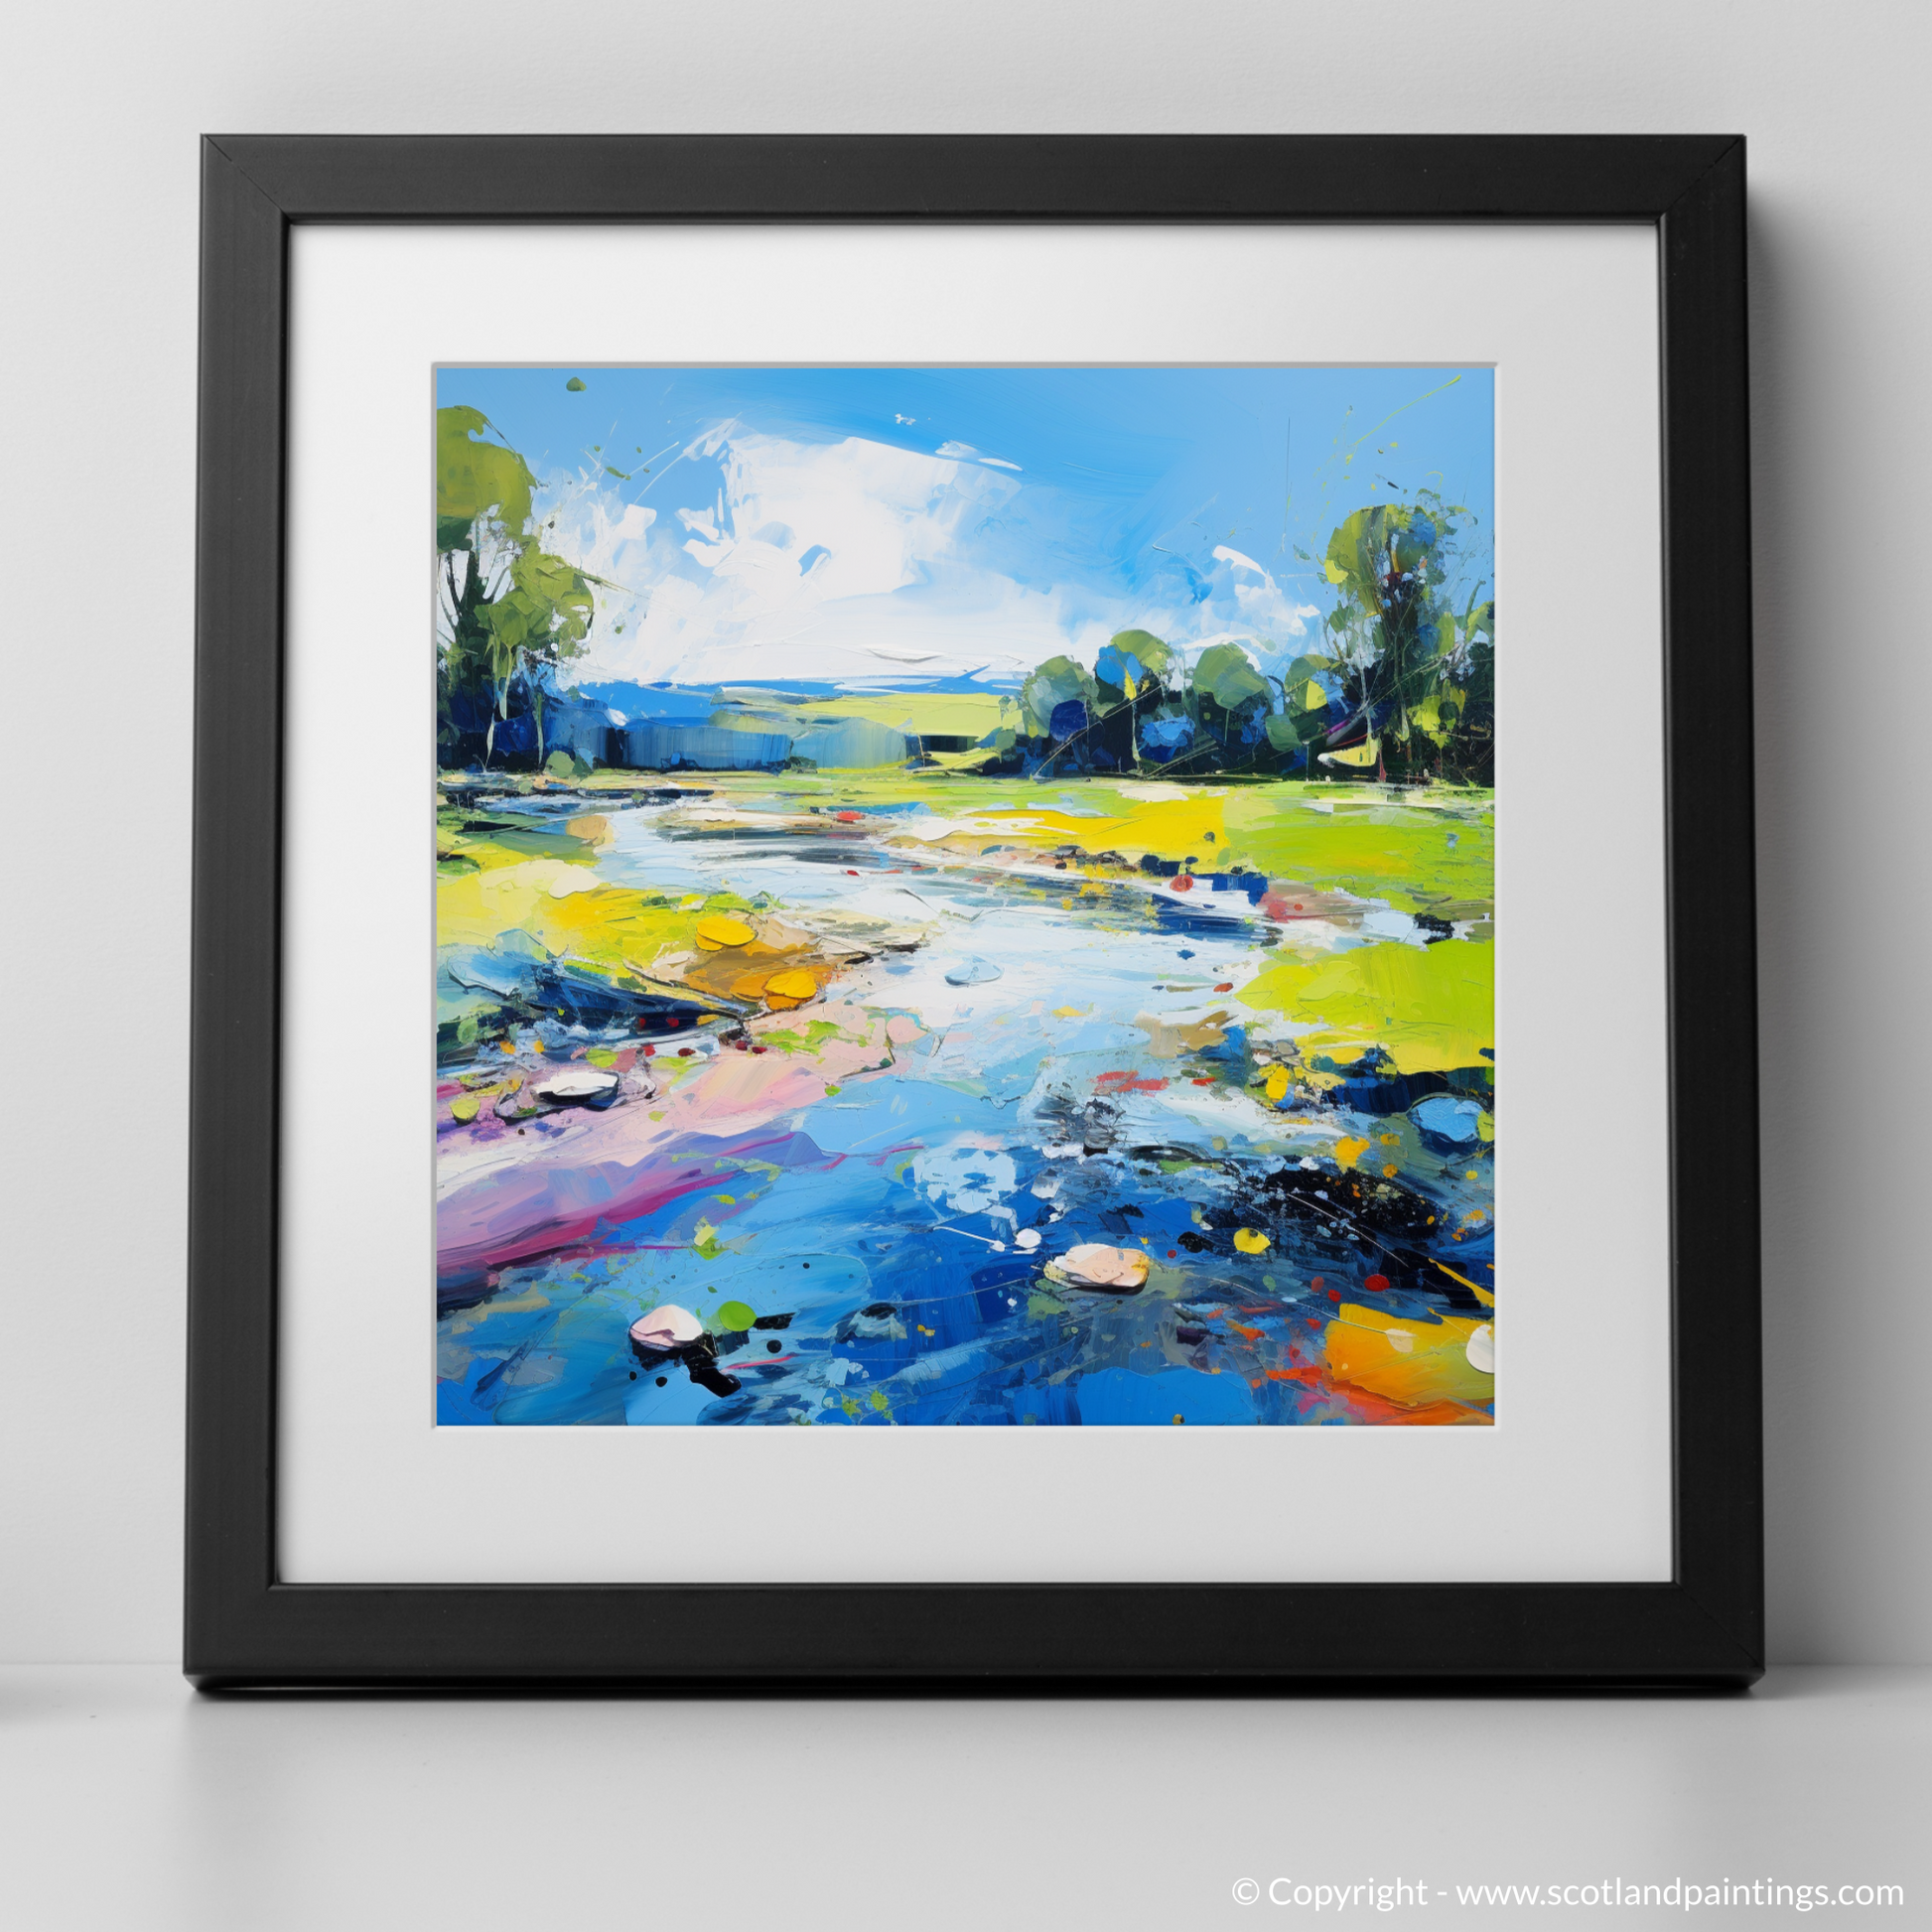 Art Print of River Dee, Aberdeenshire in summer with a black frame